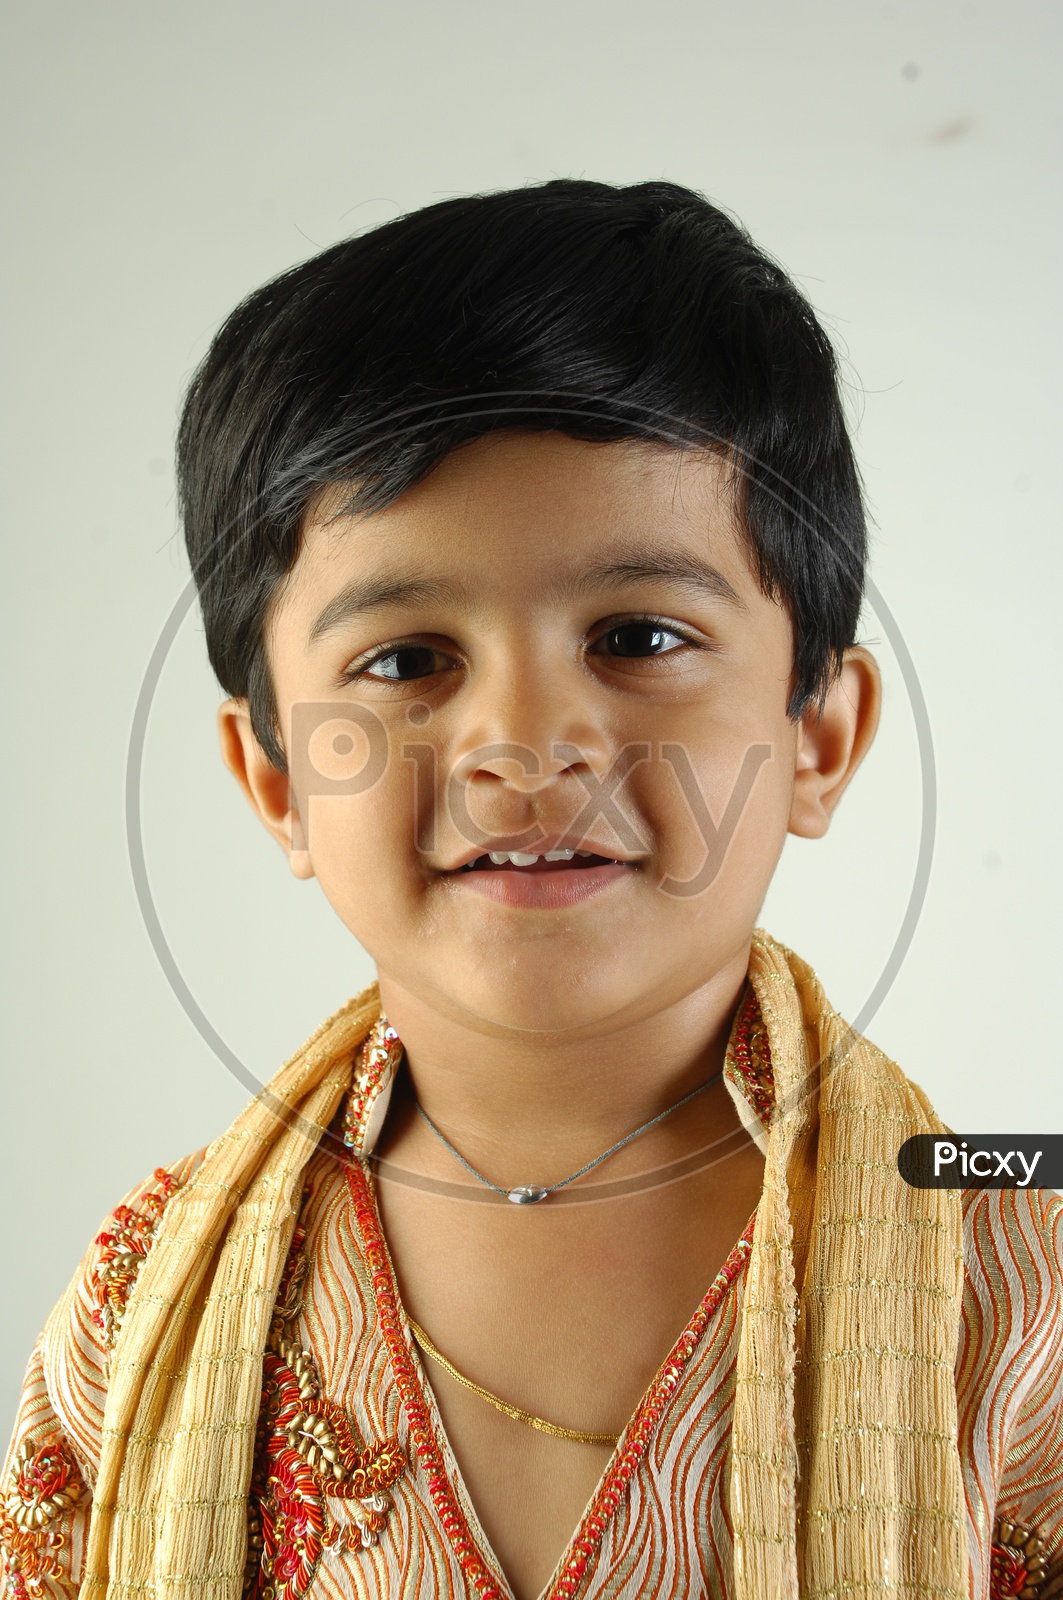 Indian Boy in Traditional Clothes With a Smiling Face   Over an Isolated White Background